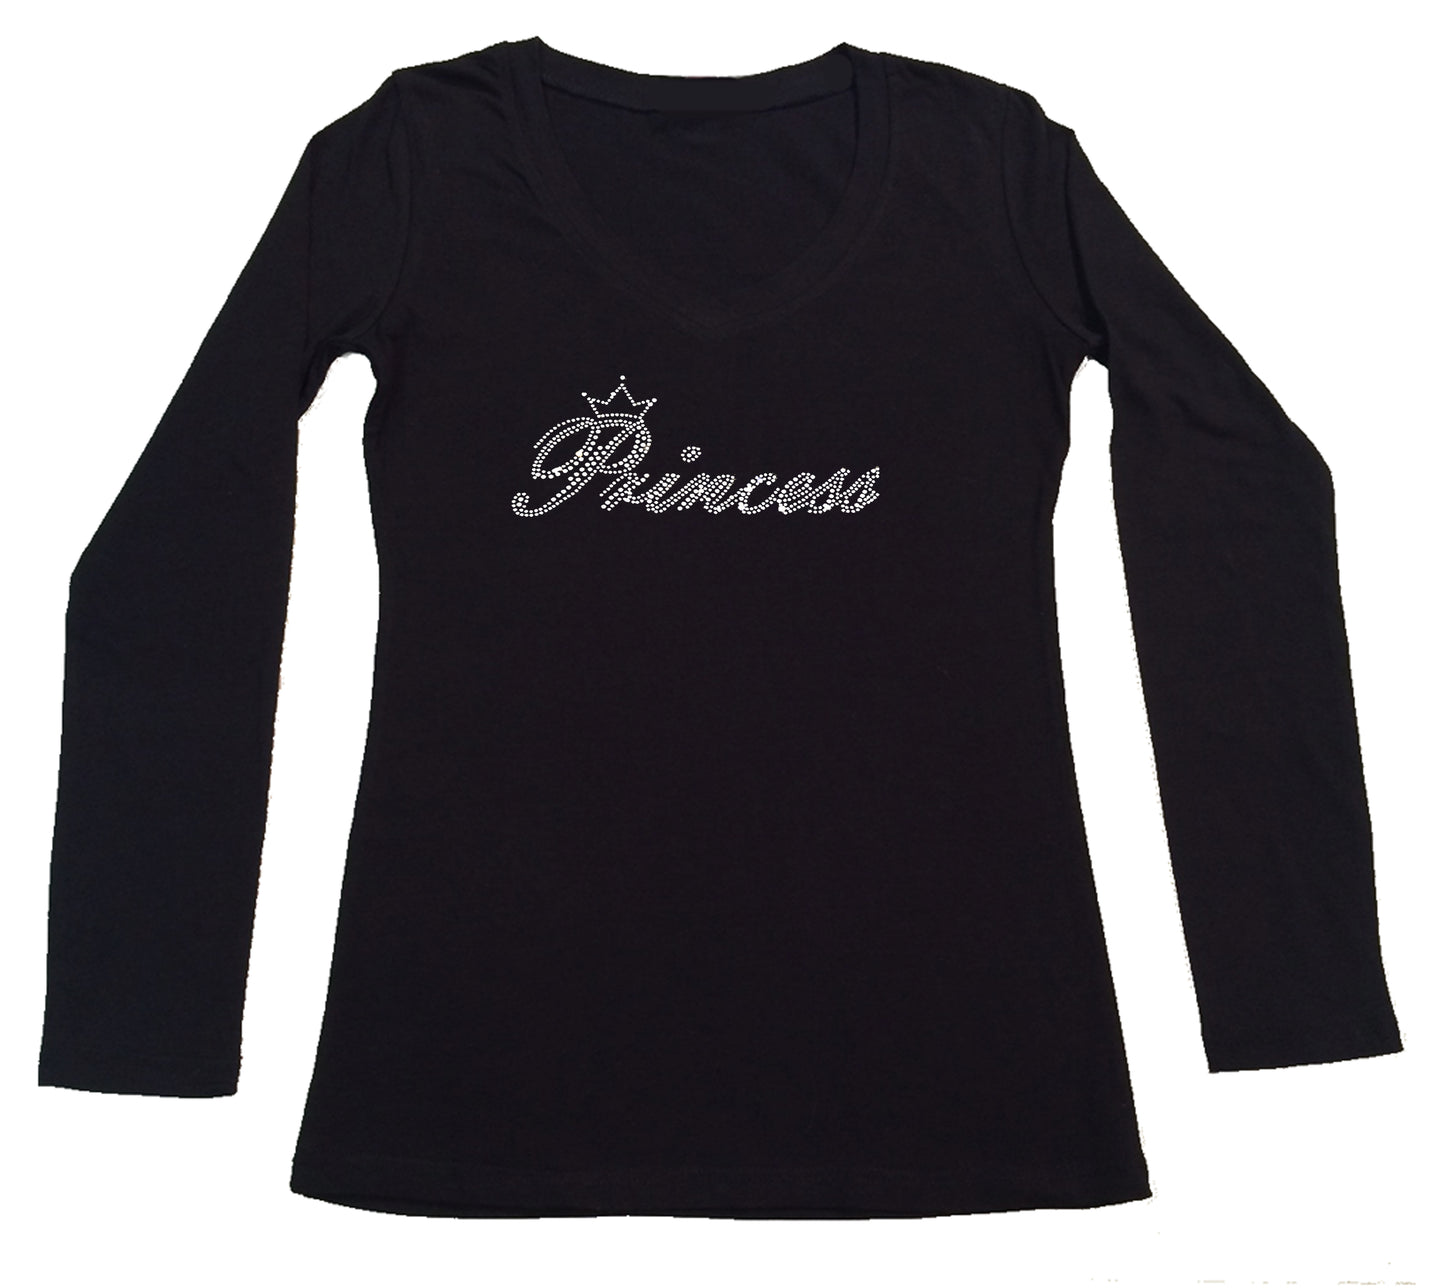 Womens T-shirt with Crystal Princess in Rhinestones